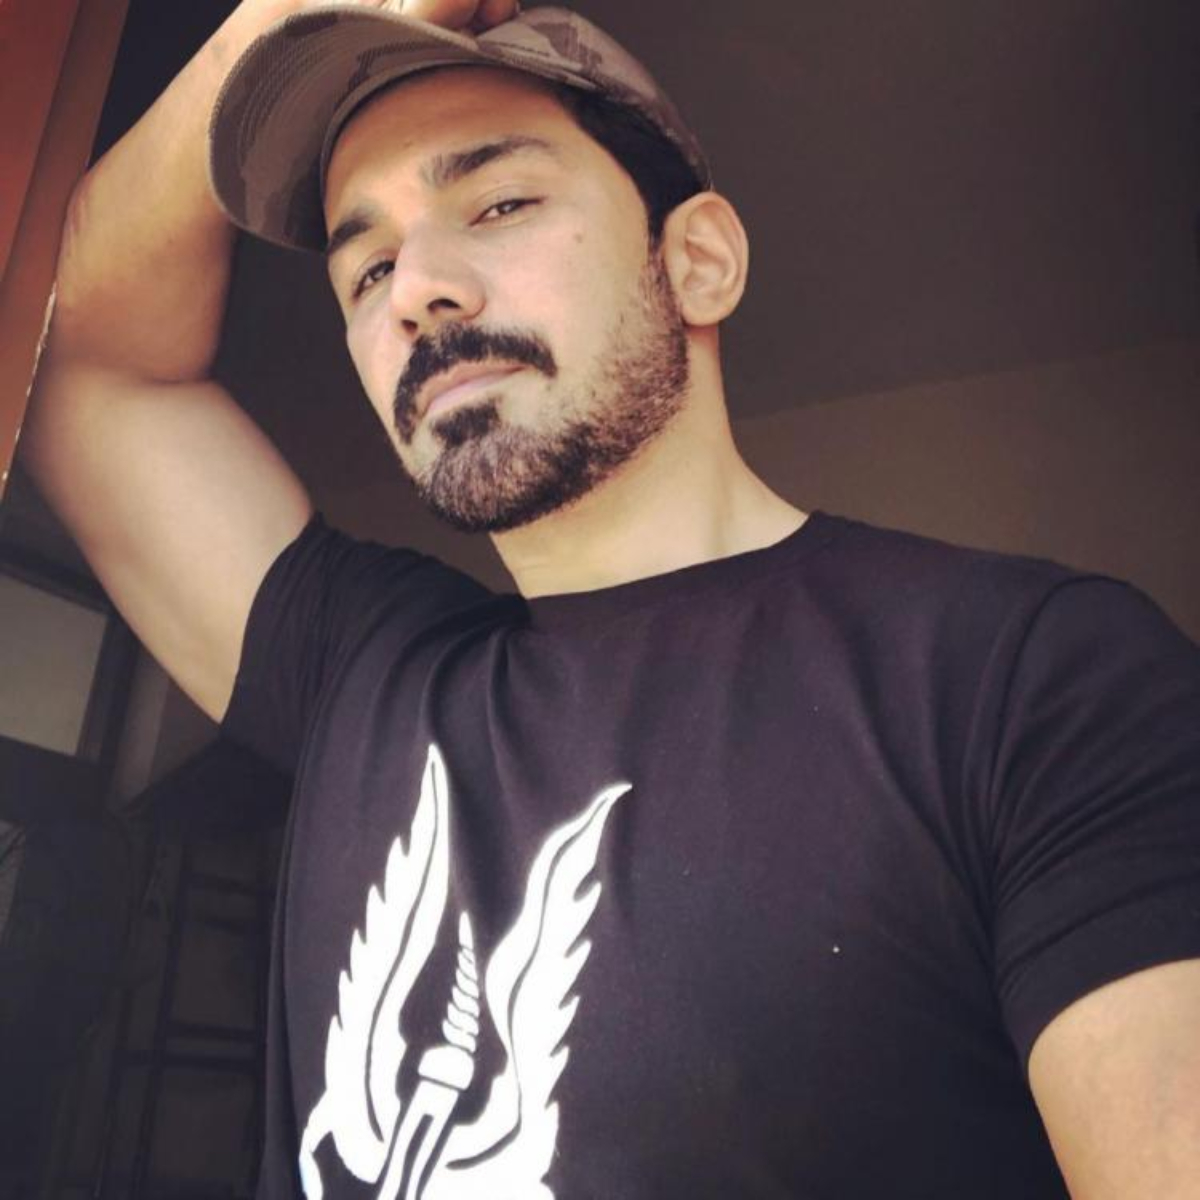 EXCLUSIVE VIDEO: Would Abhinav Shukla like to be a part of Bigg Boss 15 if offered? Here’s what he has to say